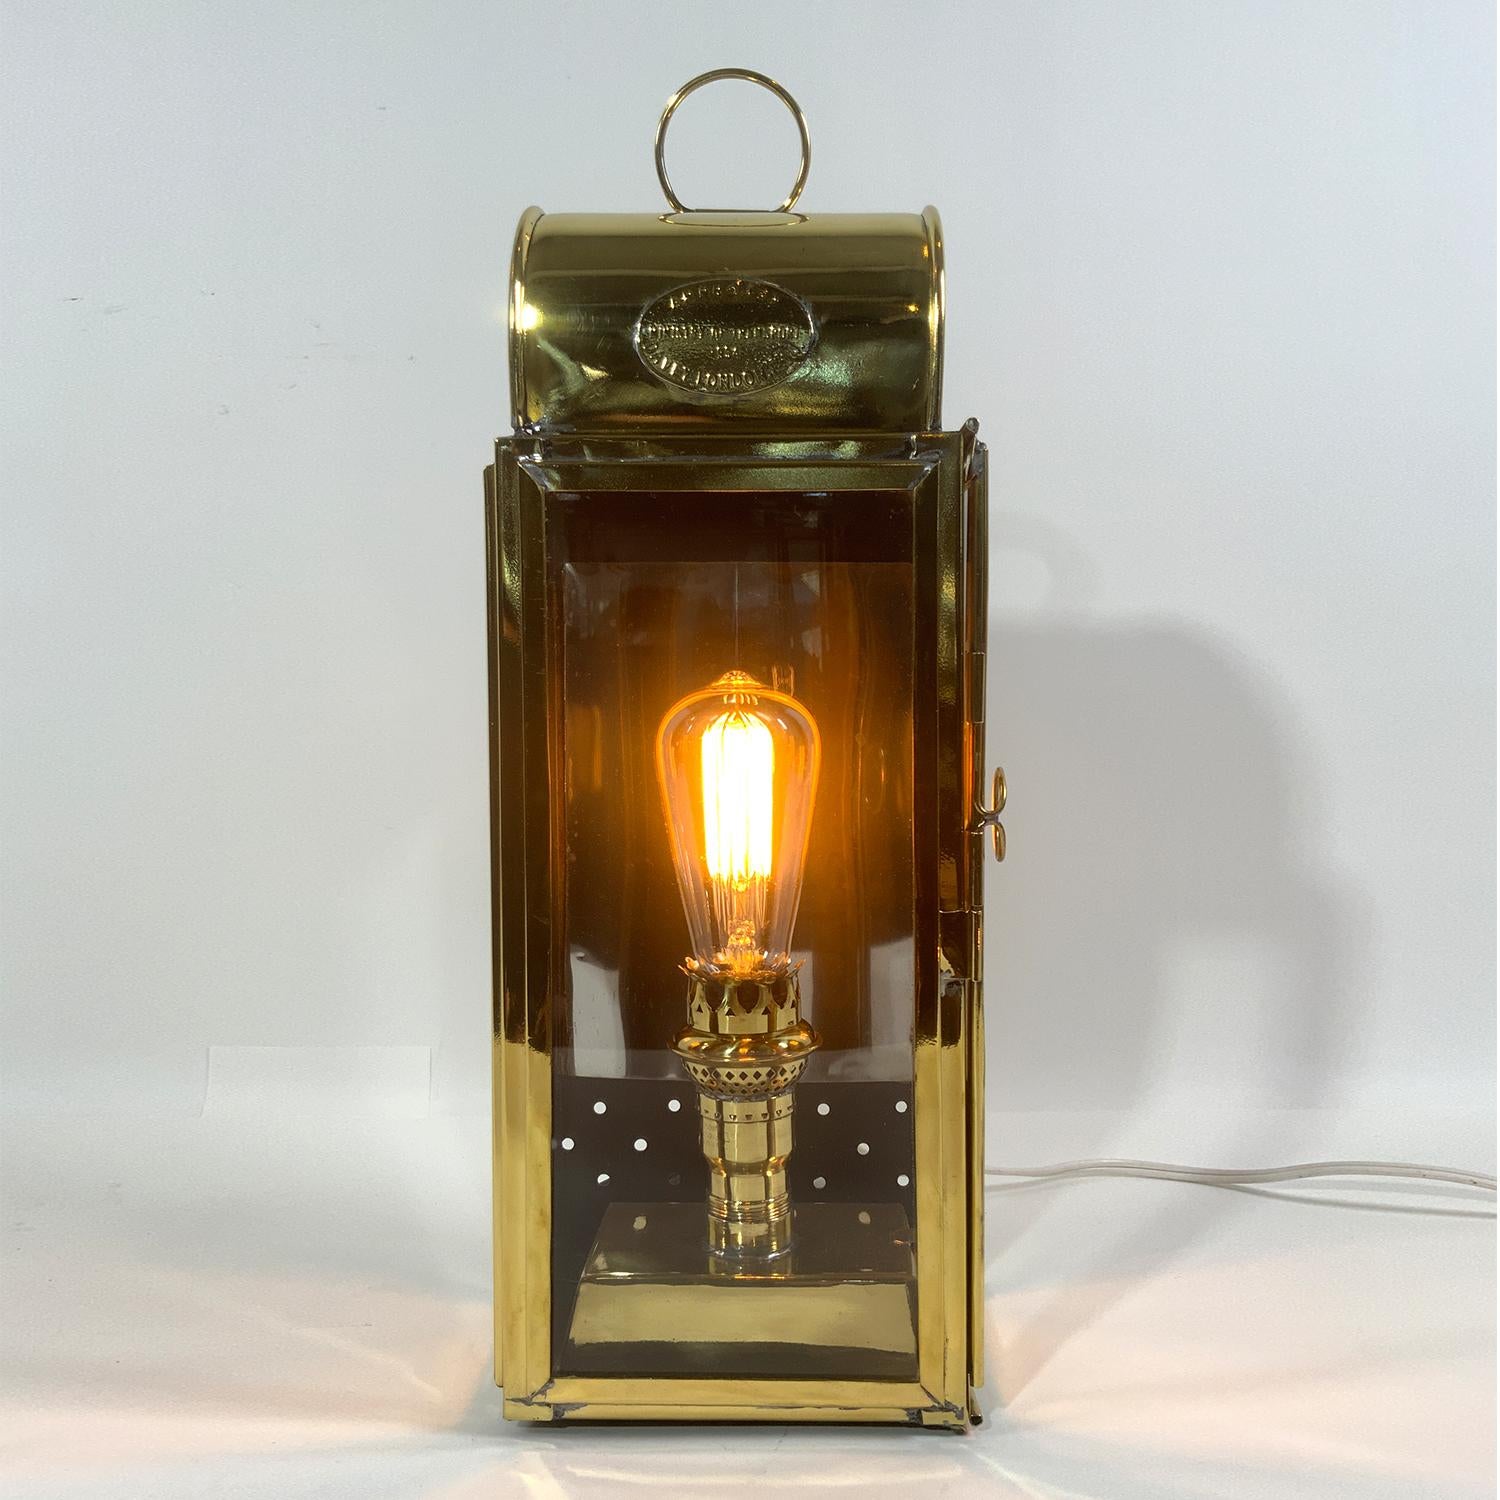 Polished and lacquered Ministry of Transport approved cabin lantern by Davey of London. With makers badge dated 1954. The oil burner has been replaced with an AC socket. Hinged door. Vented top. Carry handle.